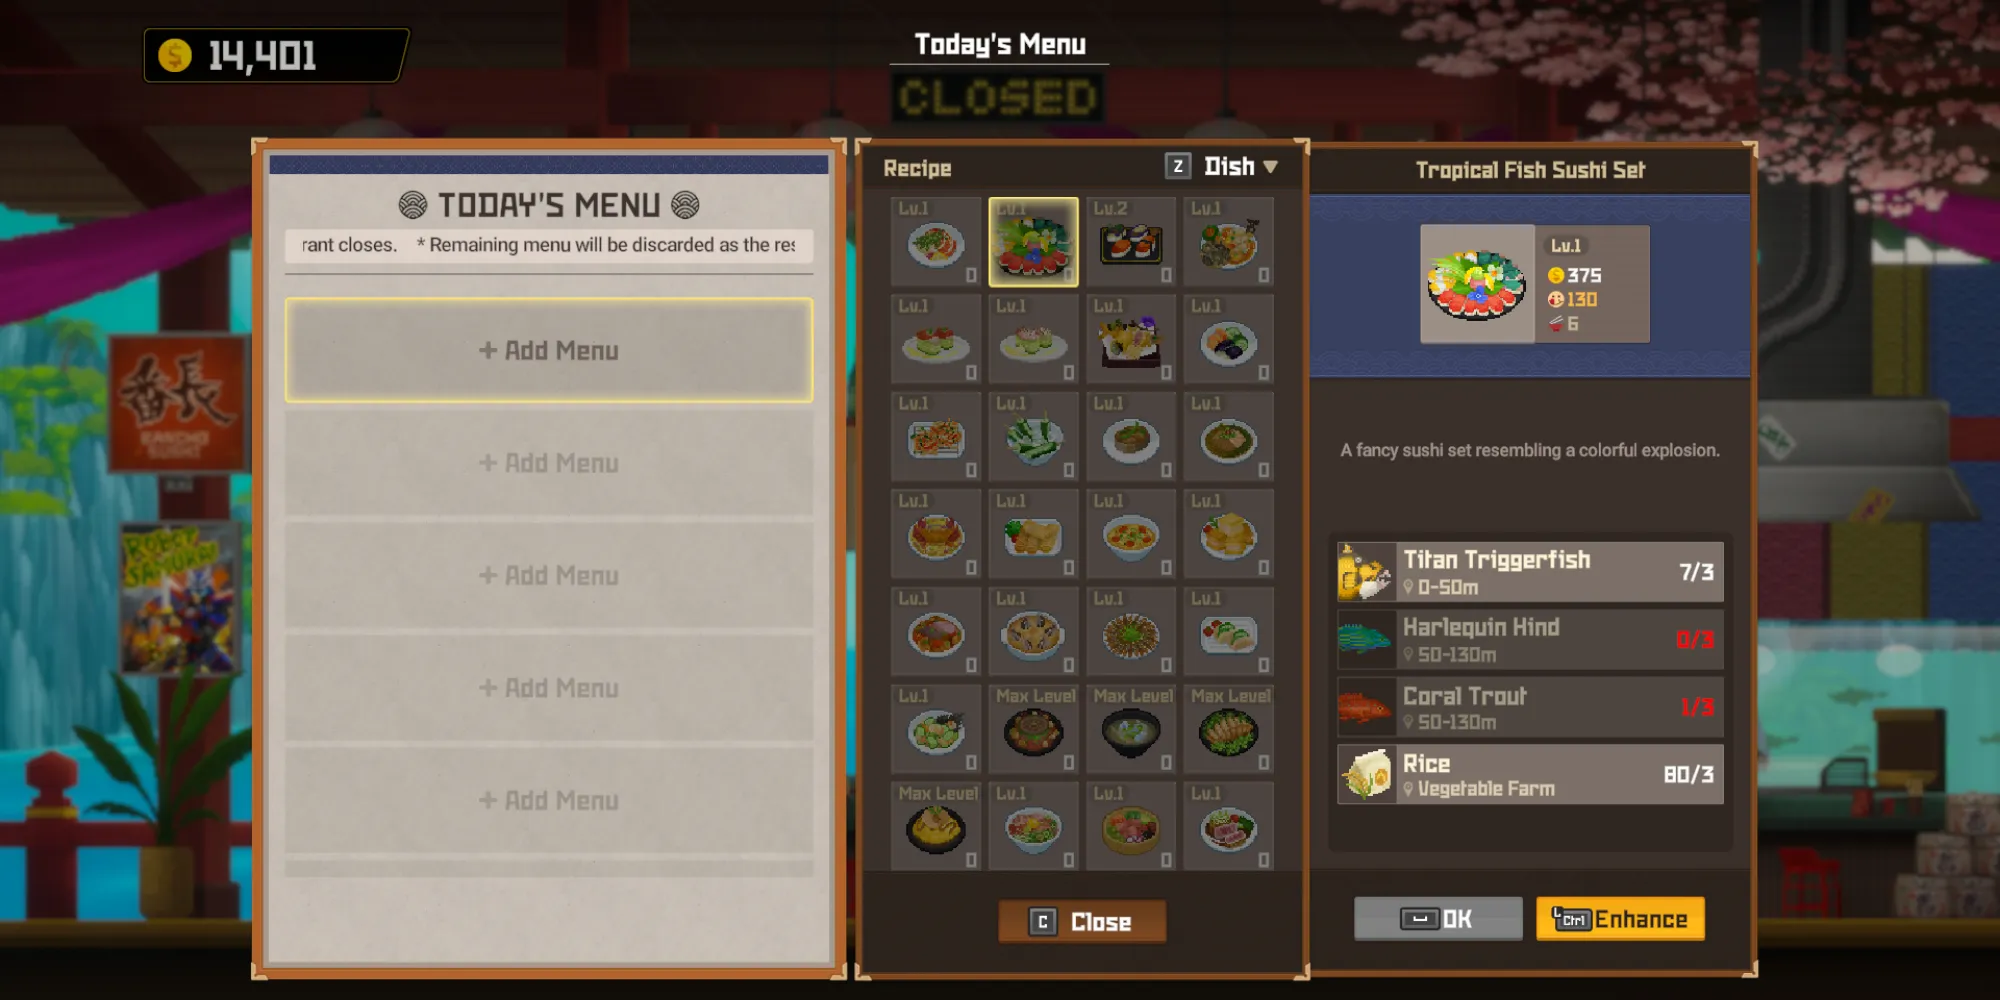 The recipe for Tropical Fish Sushi Set in Dave The Diver